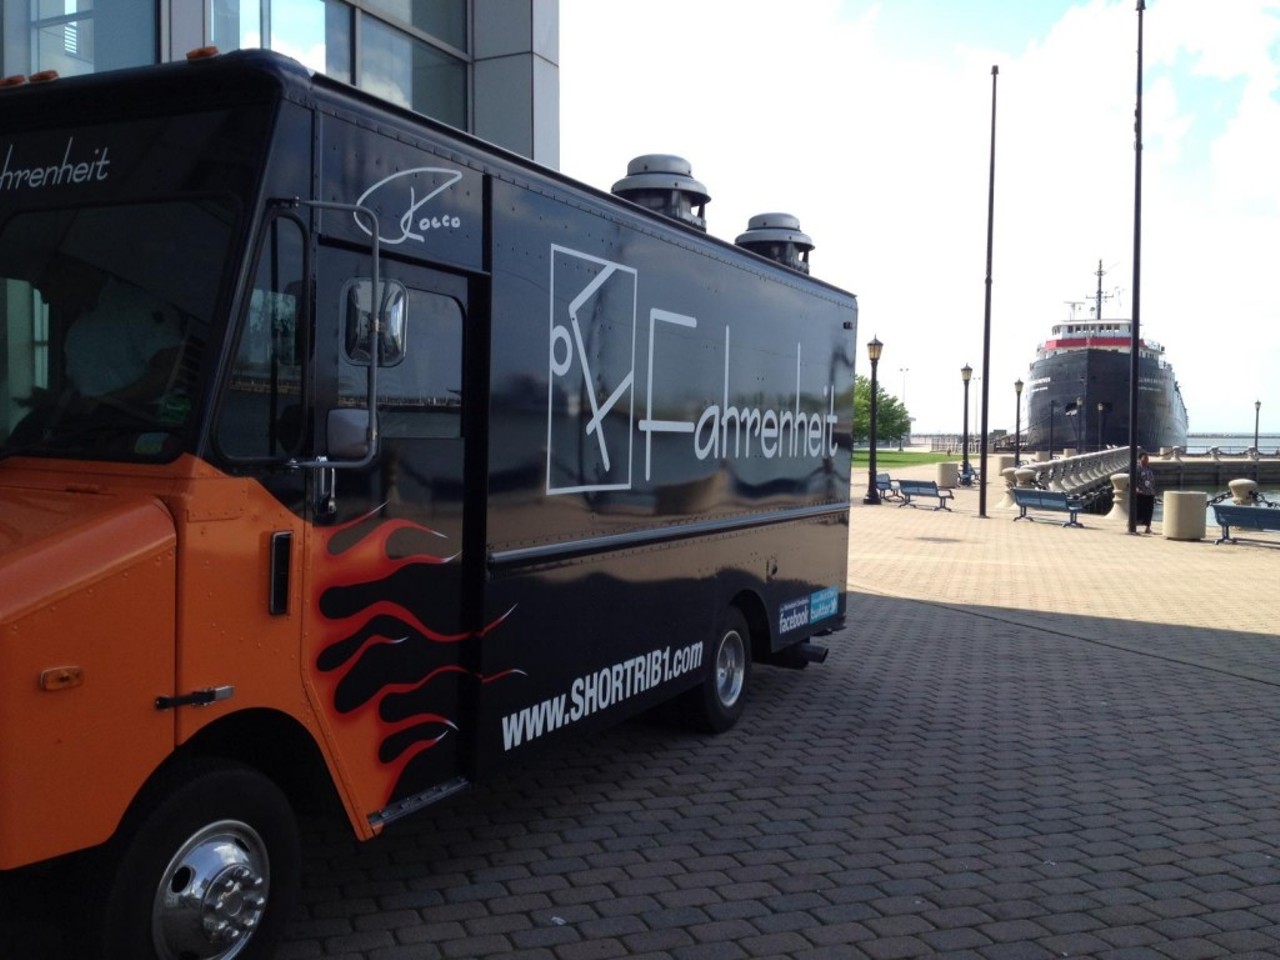 Fahrenheit -  From Trendy Tremont to the next popular outdoor event, Fahrenheit's food truck is a must try this season.